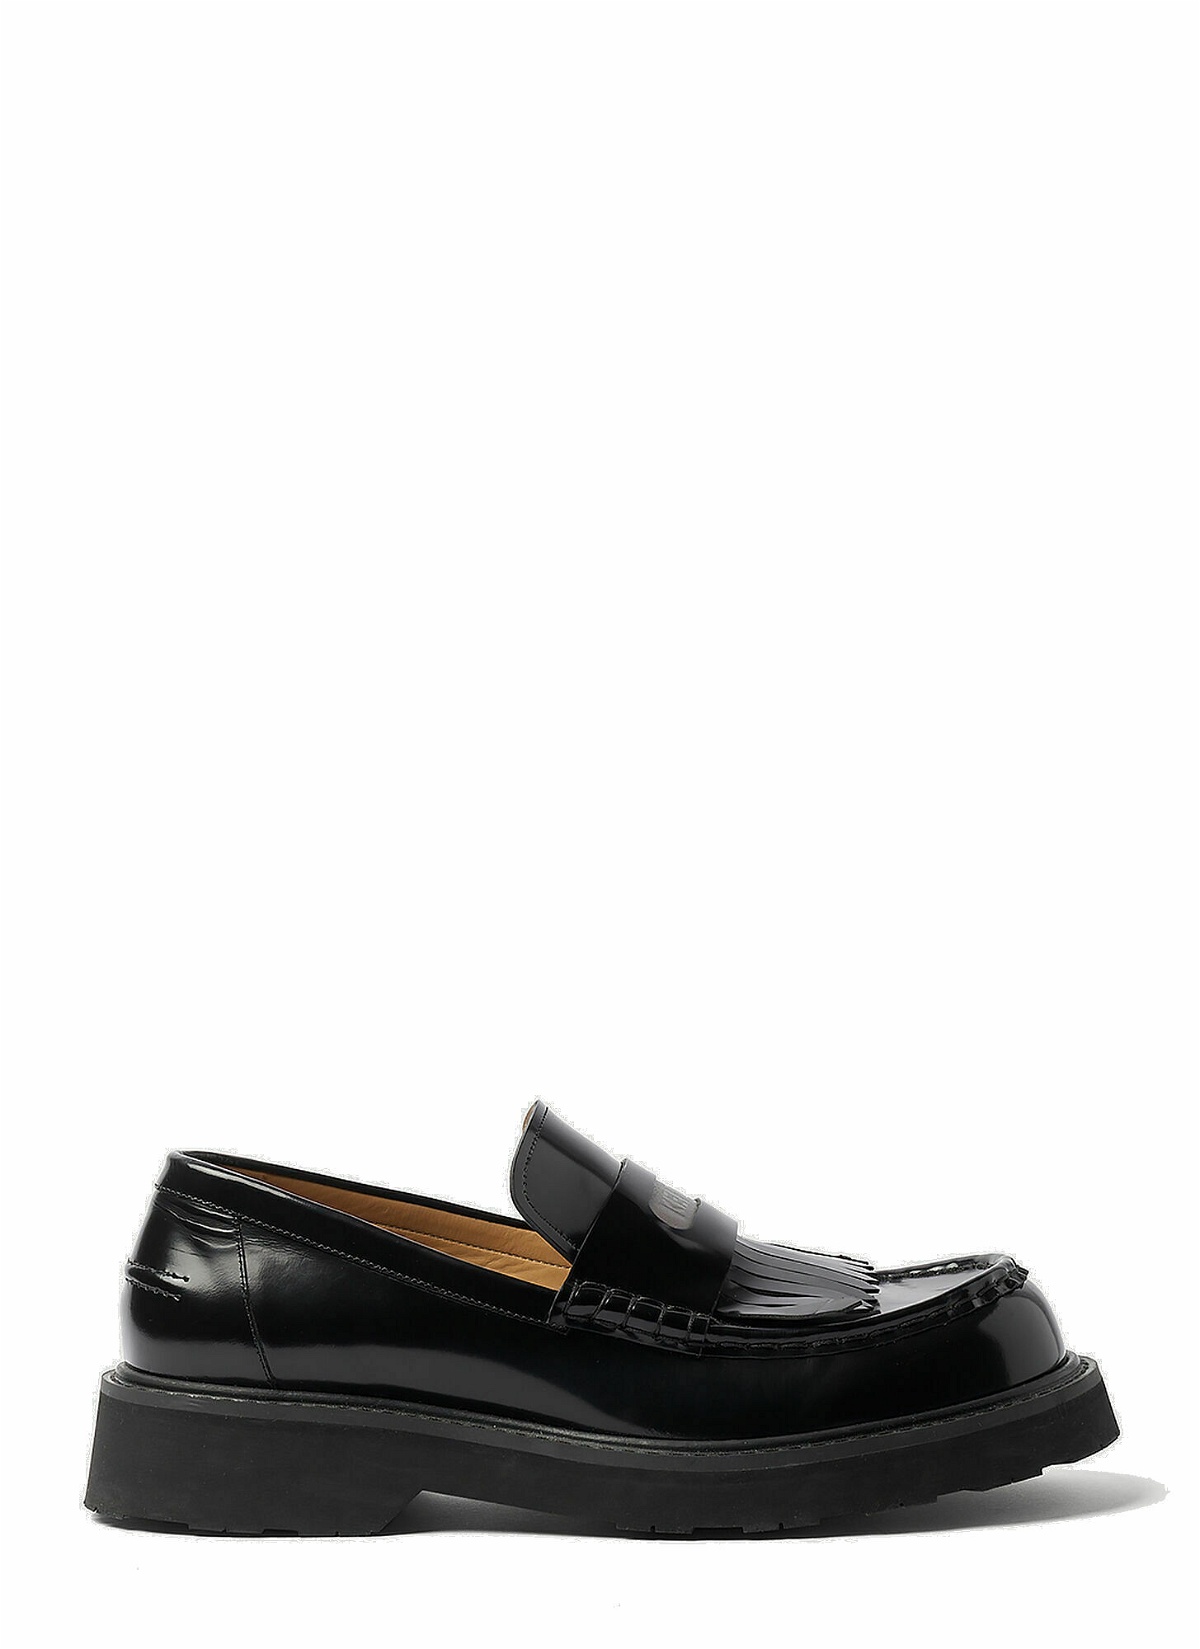 Photo: Kenzo - Smile Loafers in Black